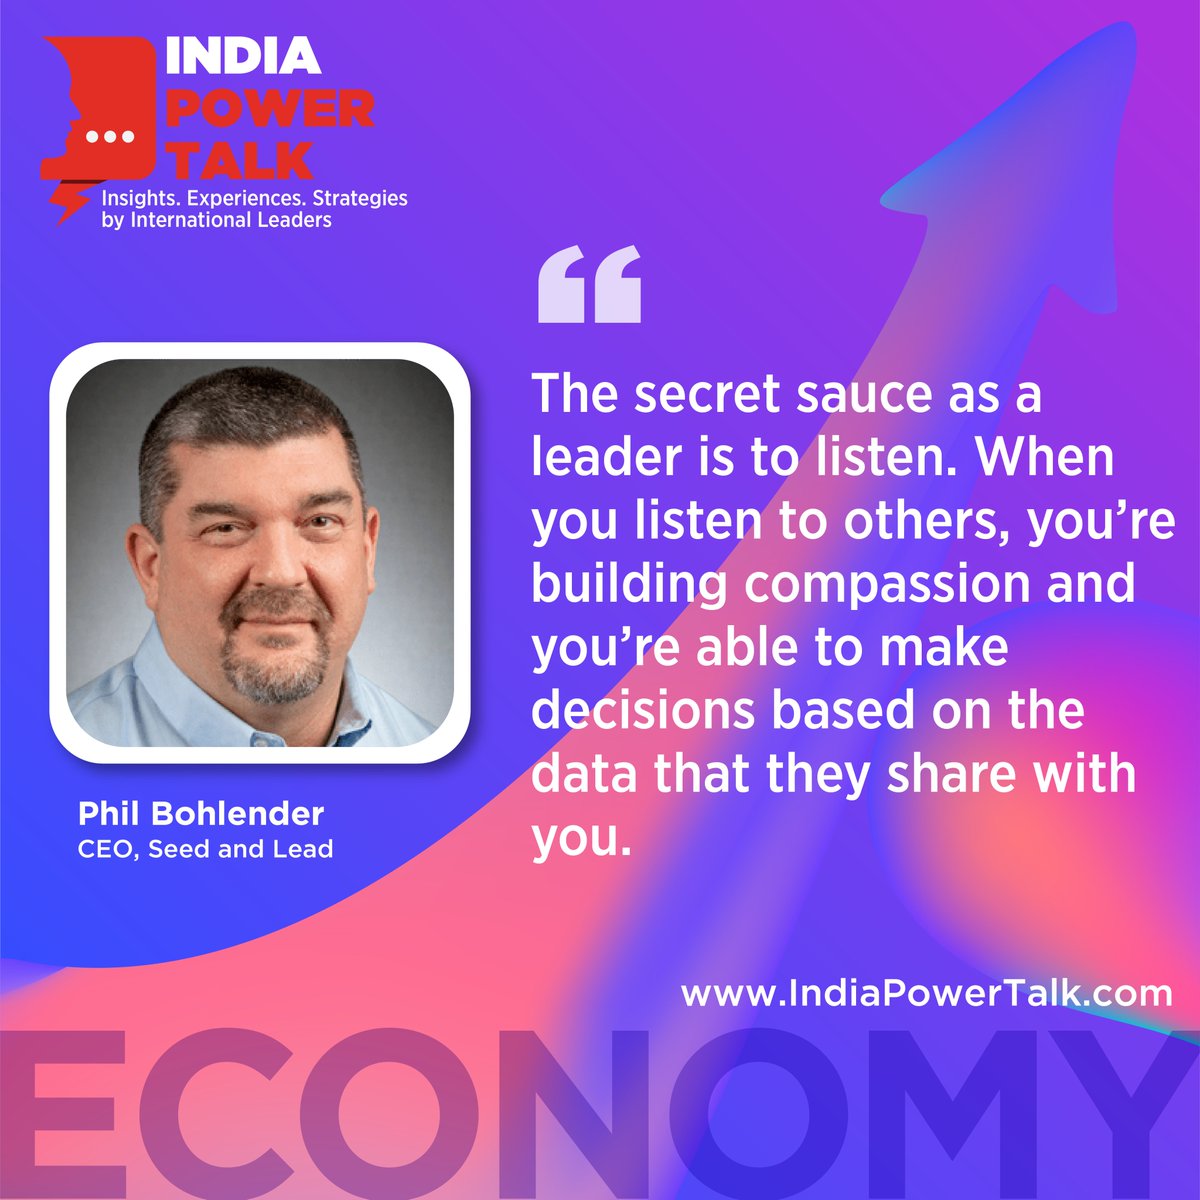 Quote of the day by Mr. Phil Bohlender.

#IndiaPowerTalk #InvestmentInEducation #BusinessStrategies #Economy #Education #EconomyAndEducaion #EducationInIndia #India #NitinPotdar #PhilBohlender